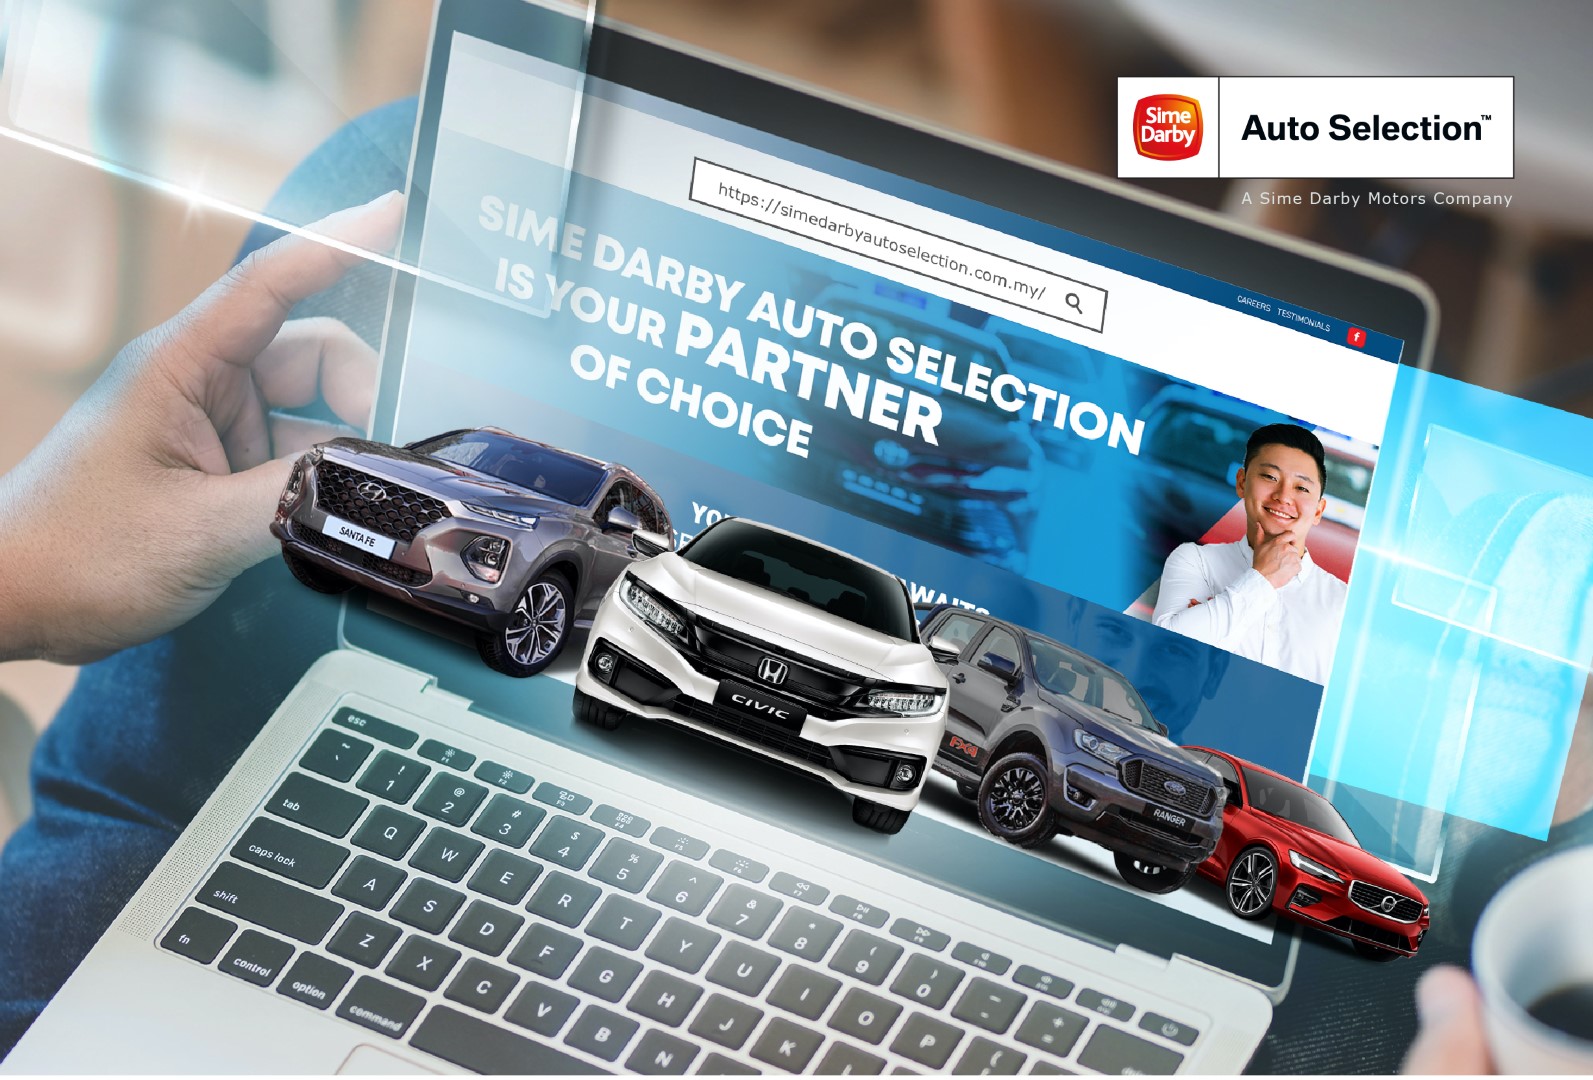 sime darby auto selection